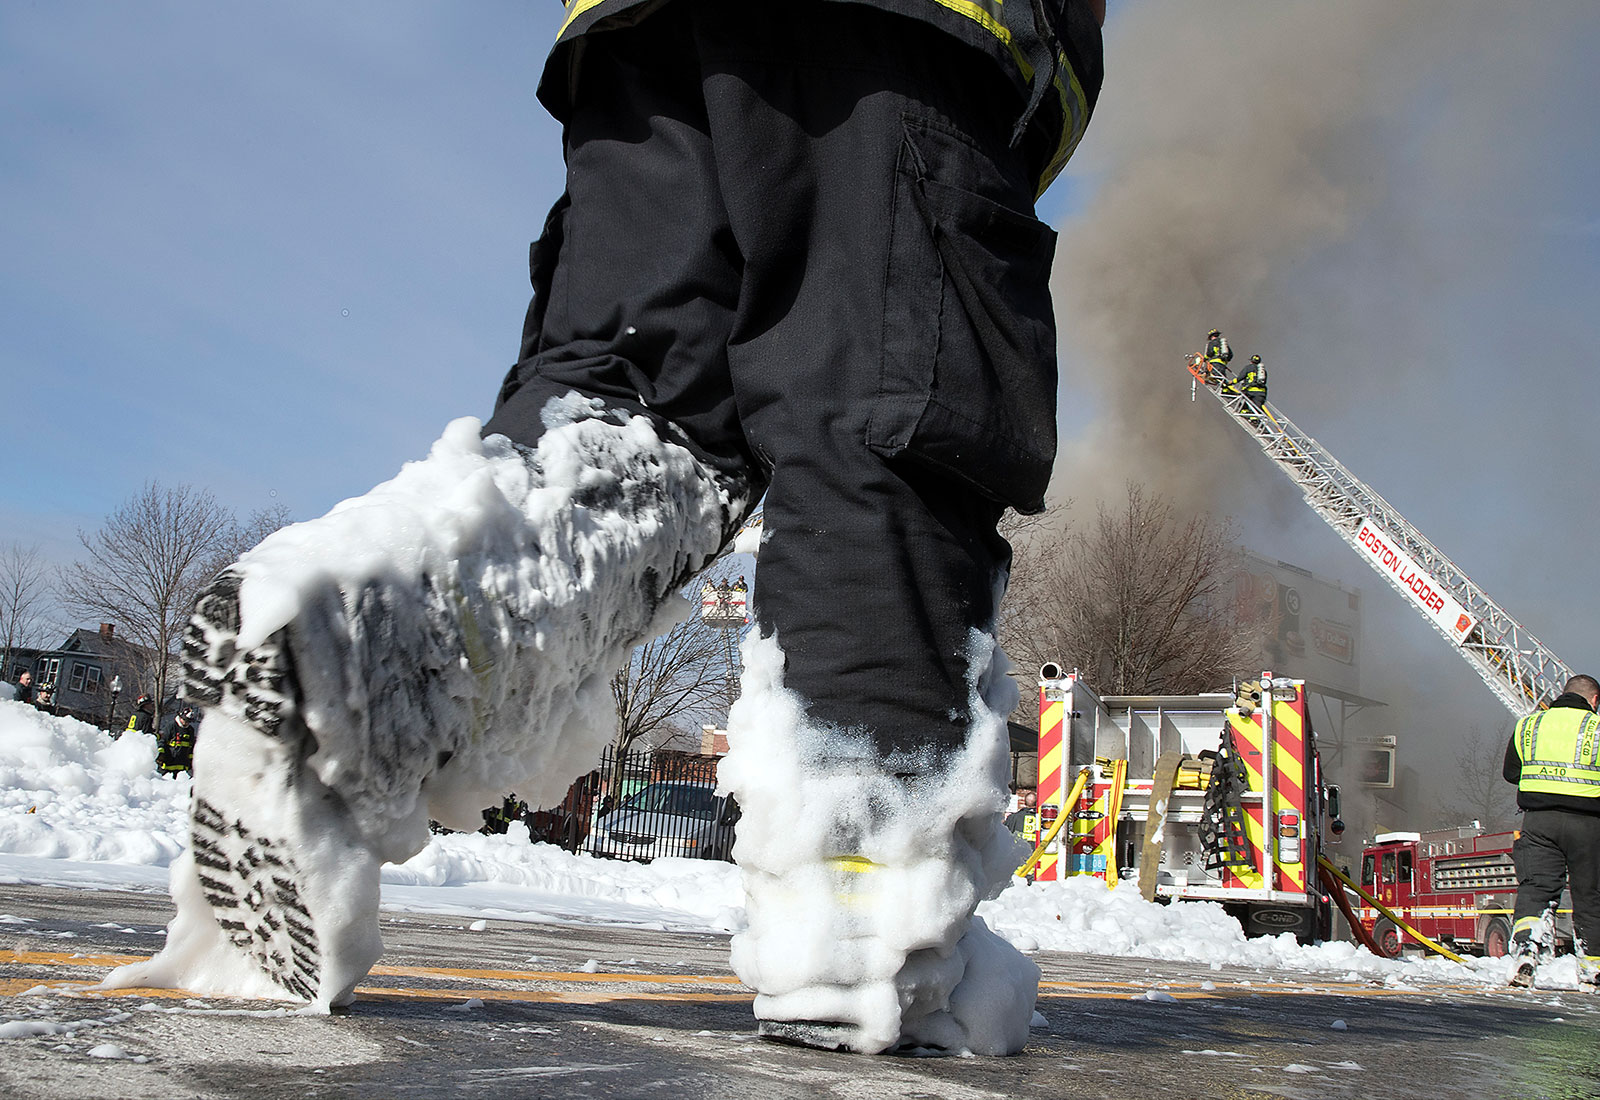 Firefighter walking with foam-covered boots